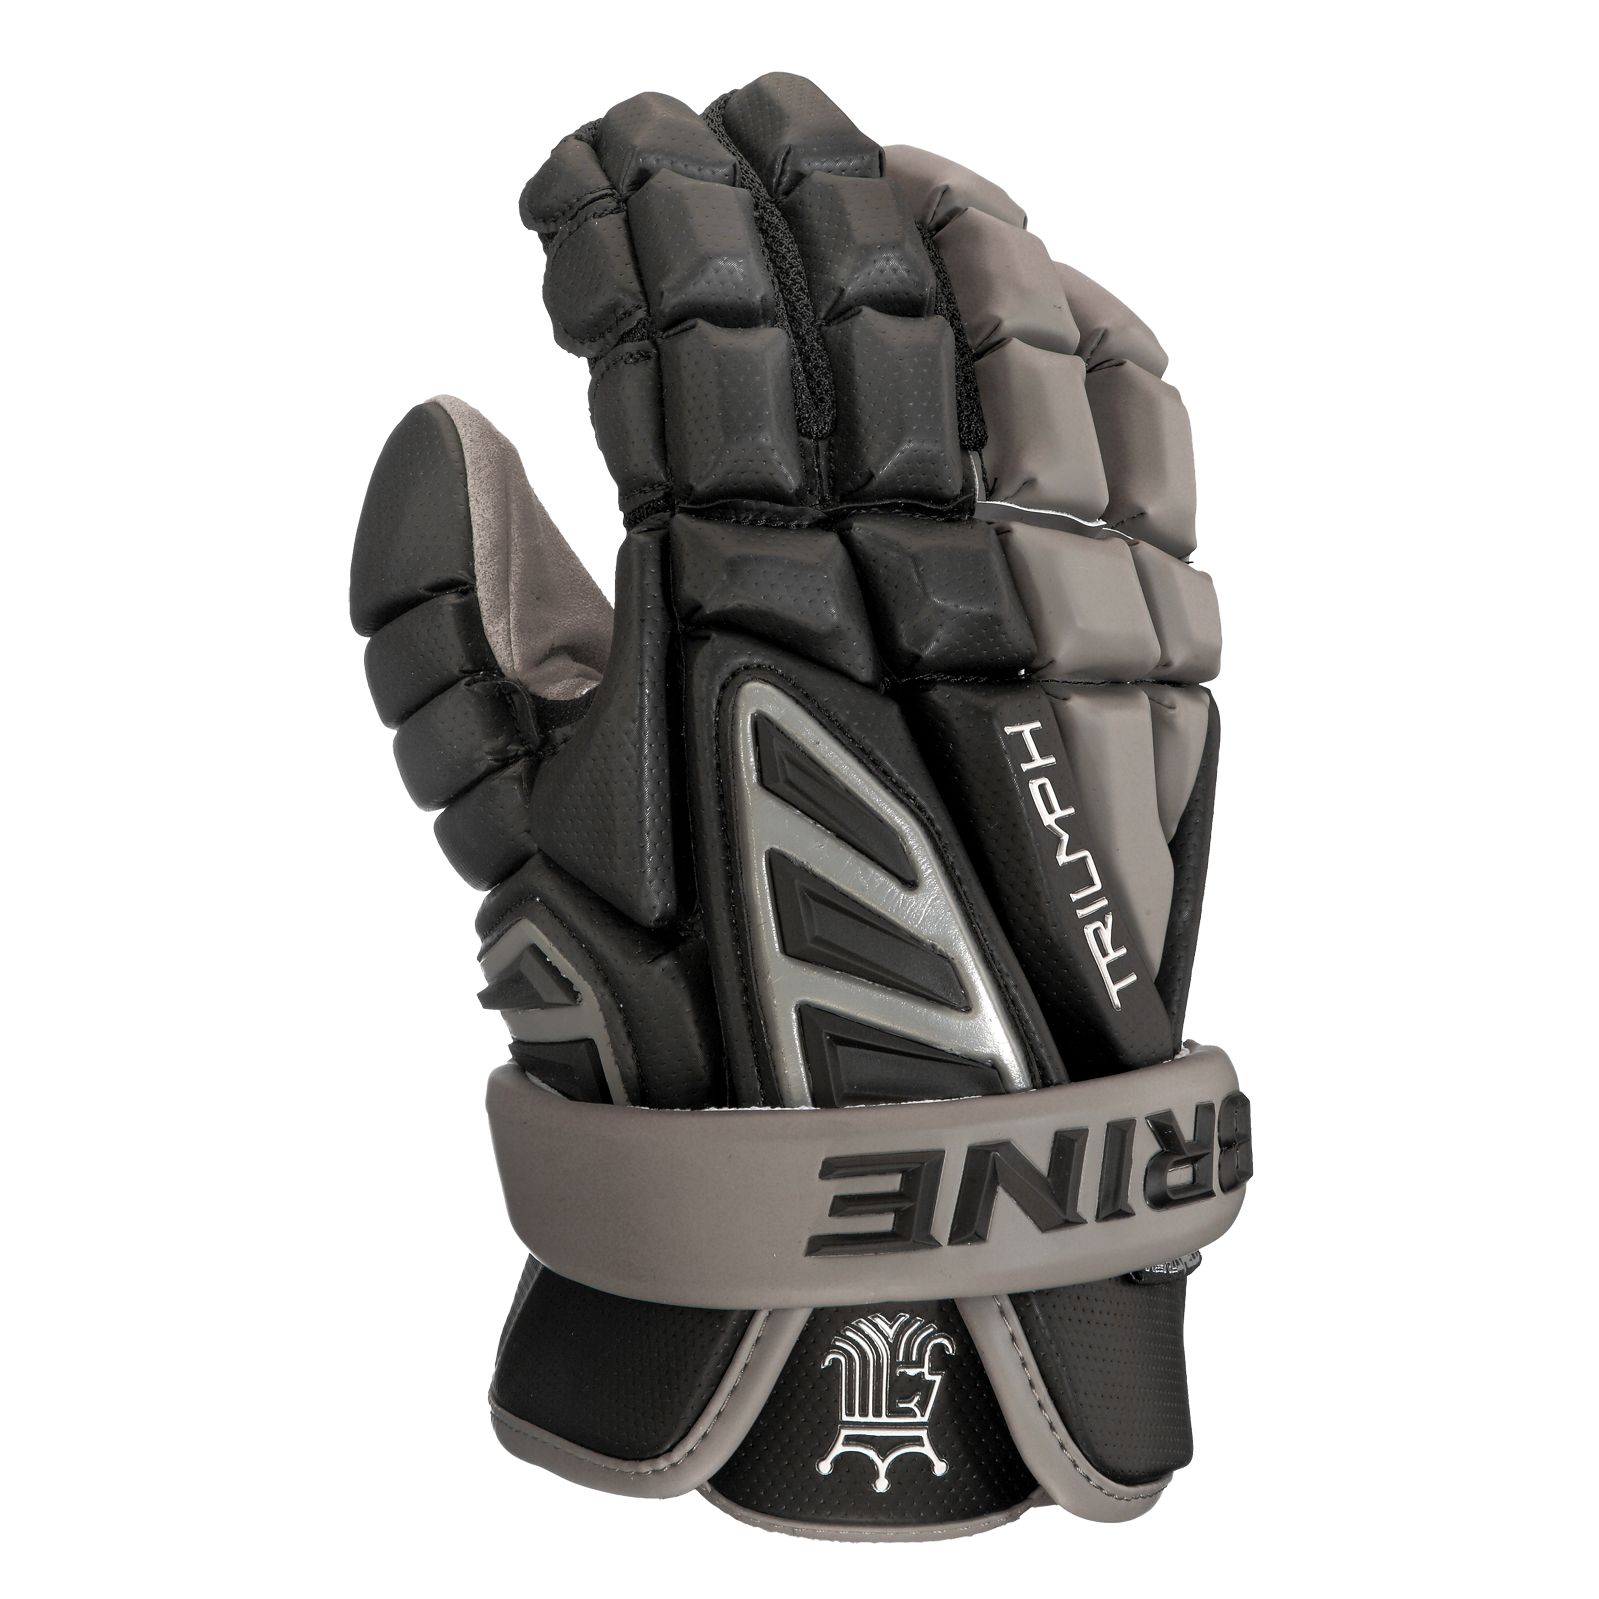 Triumph III XL glove, Black with Grey image number 0